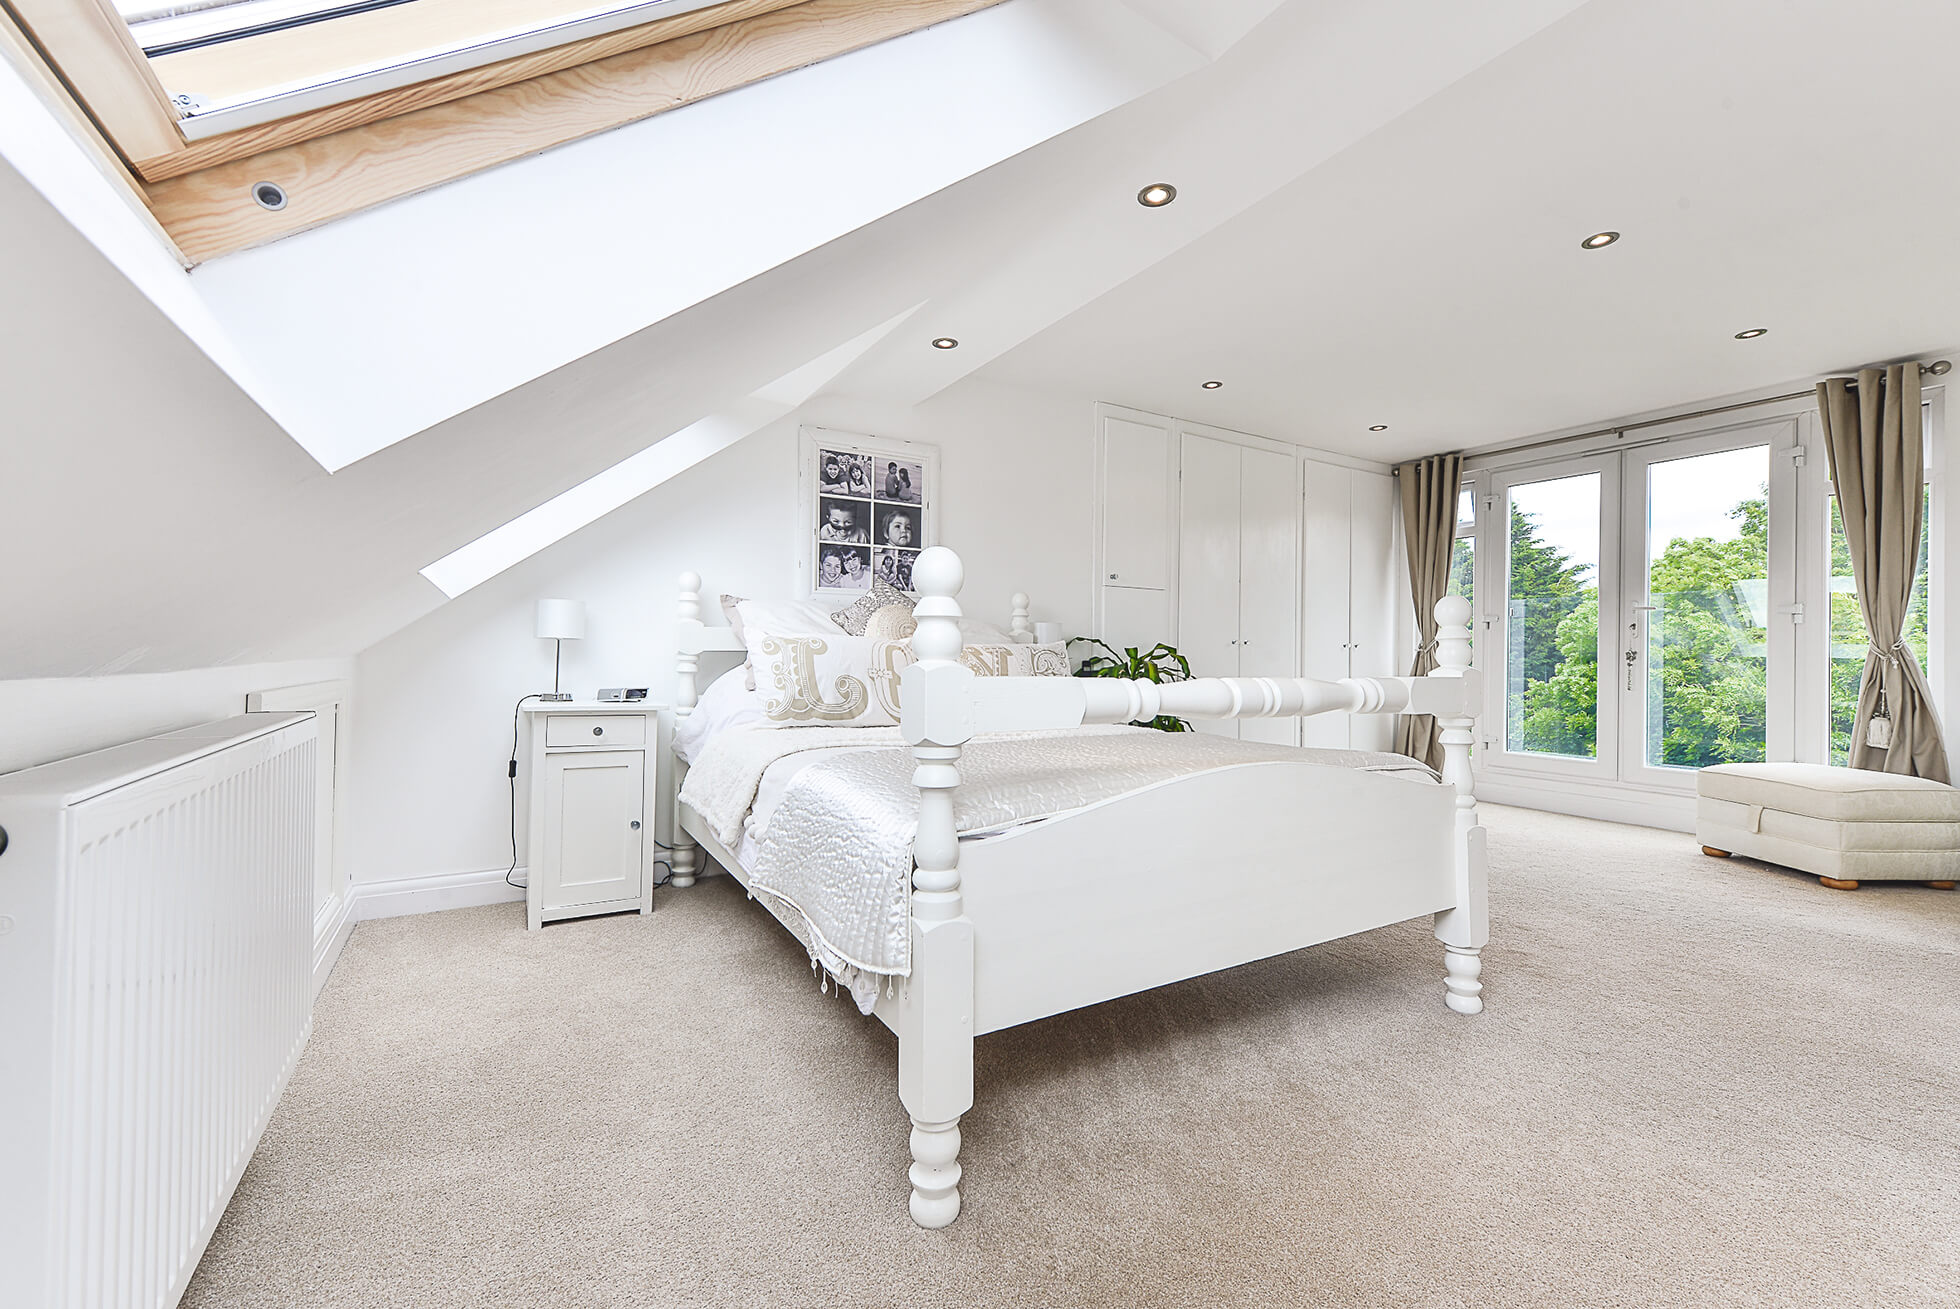 Do you have a question about converting your Loft in Sacombe Green? Here are the most popular questions asked by our clients.